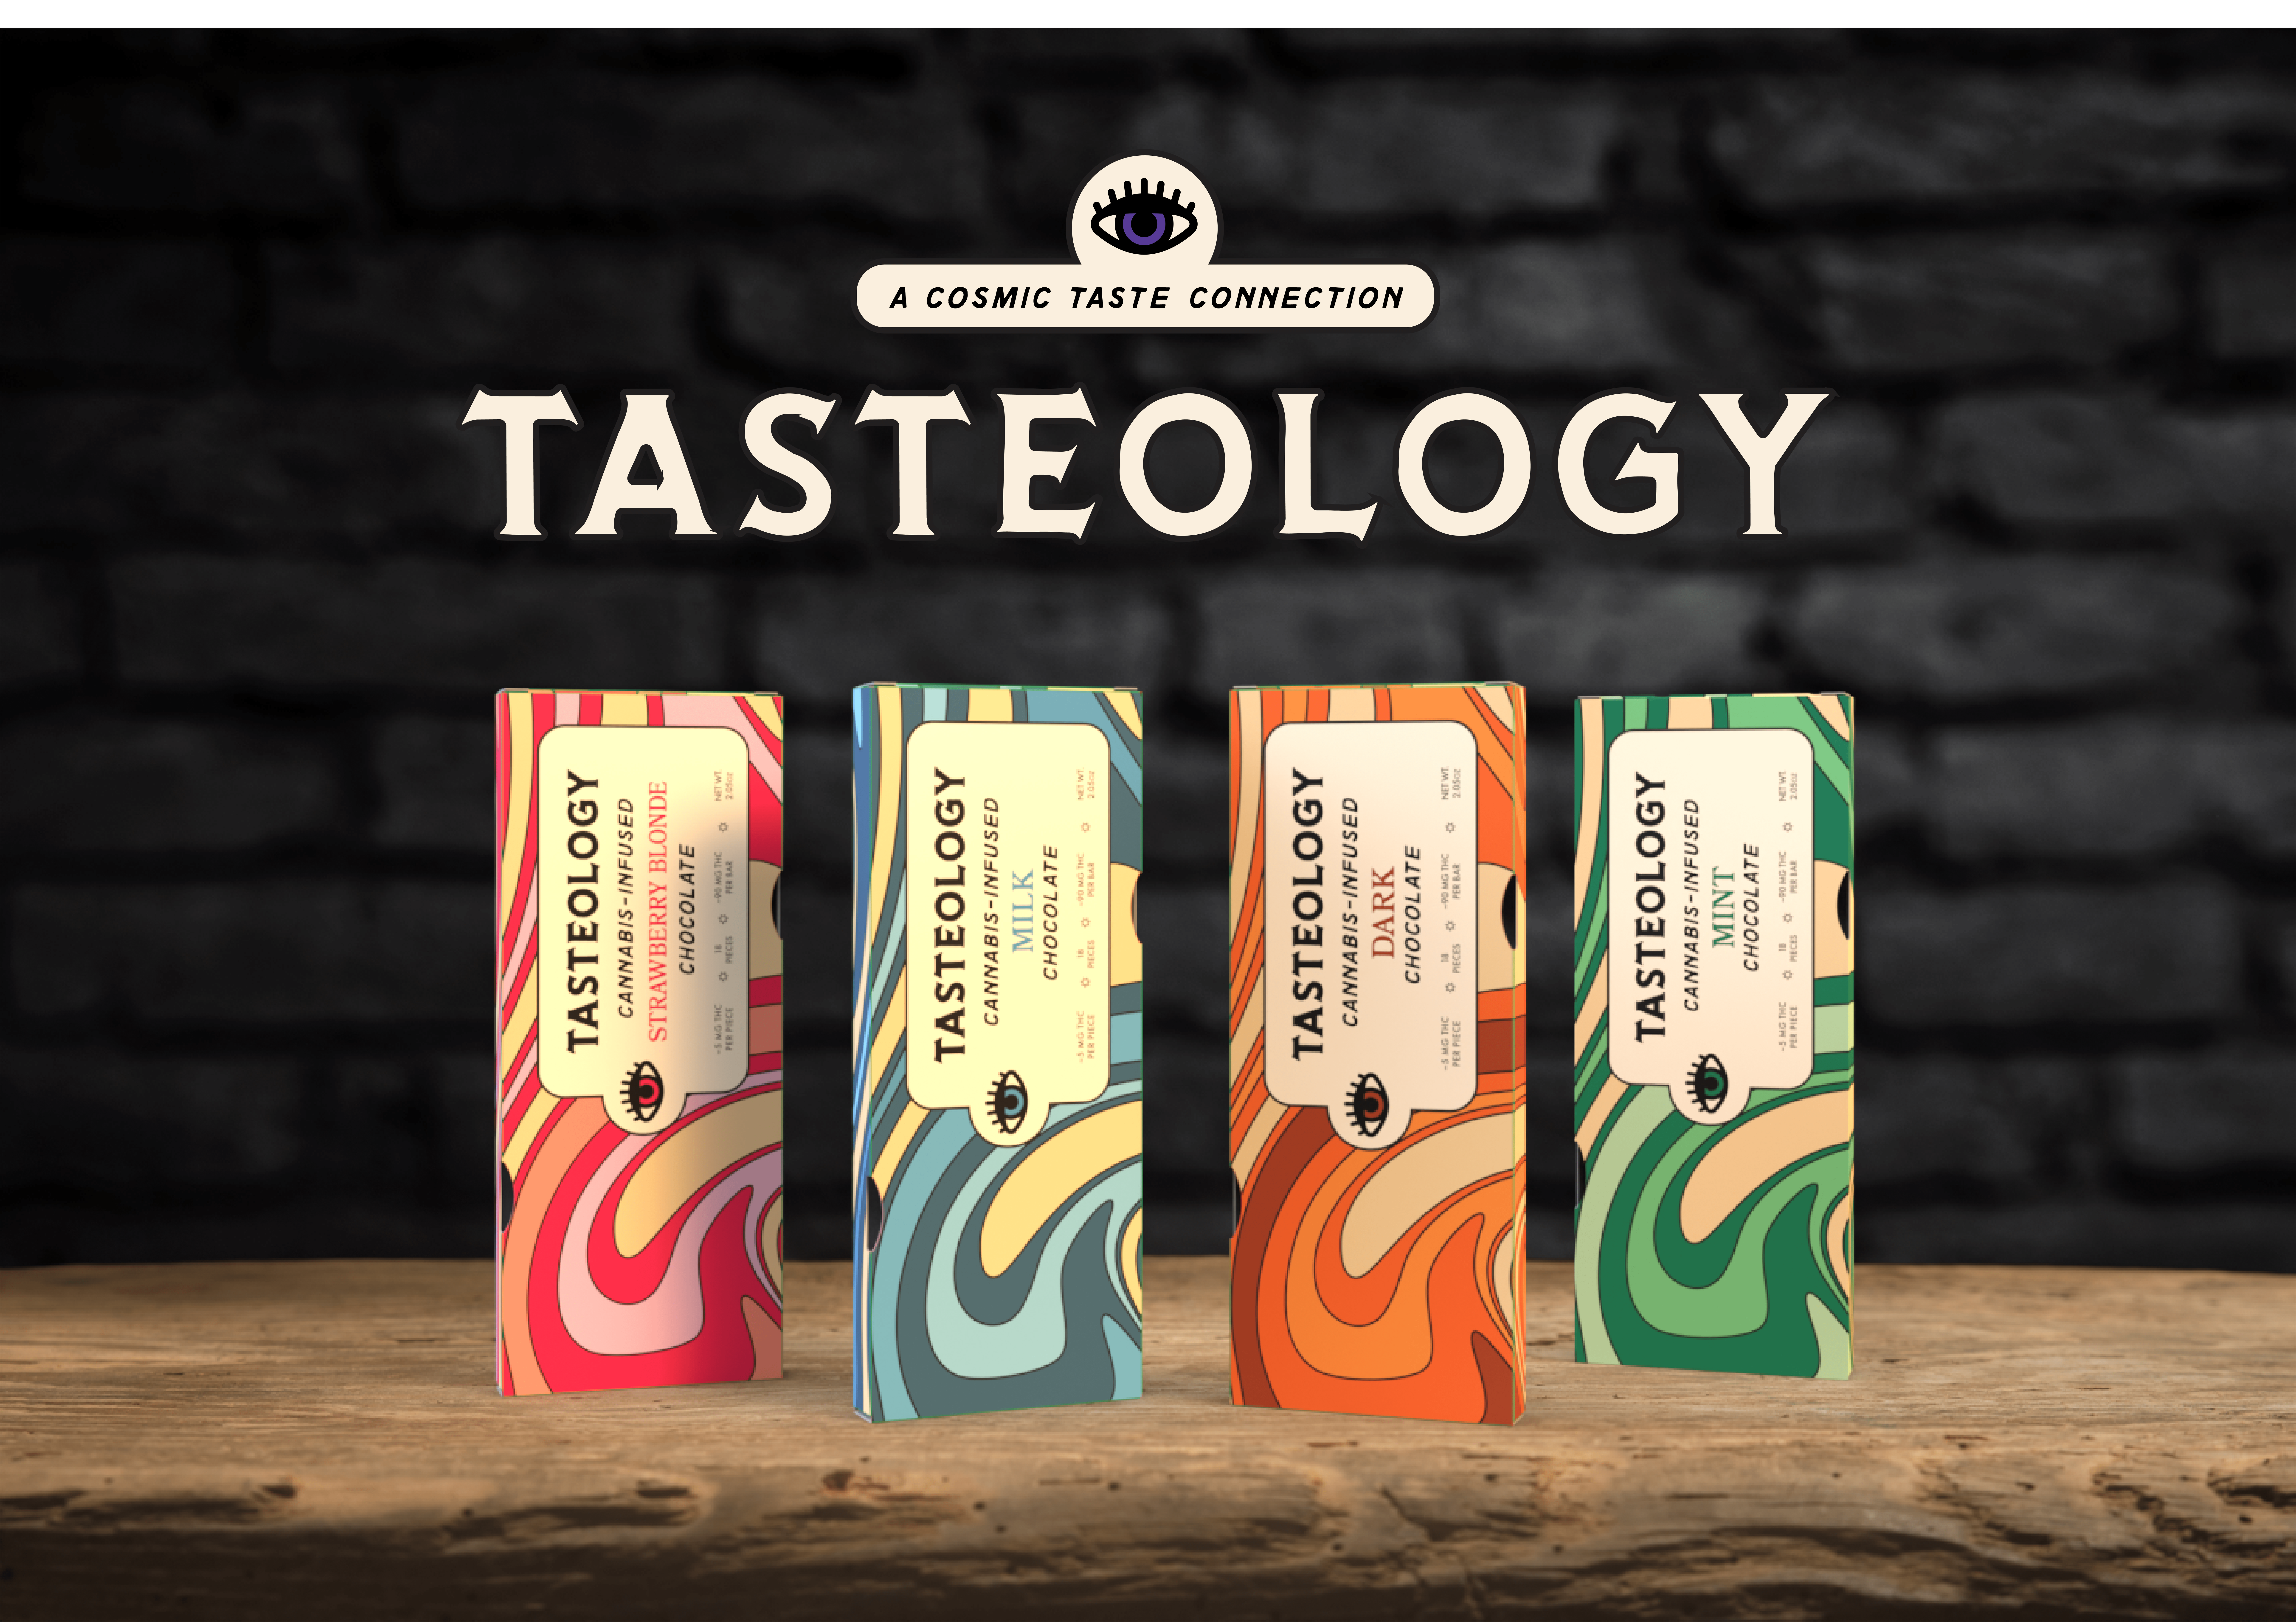 Jushi Holdings Launches Line of Cannabis-Infused Chocolates by Tasteology in Massachusetts, Now Available in Three Flavors, with Fourth Coming Soon